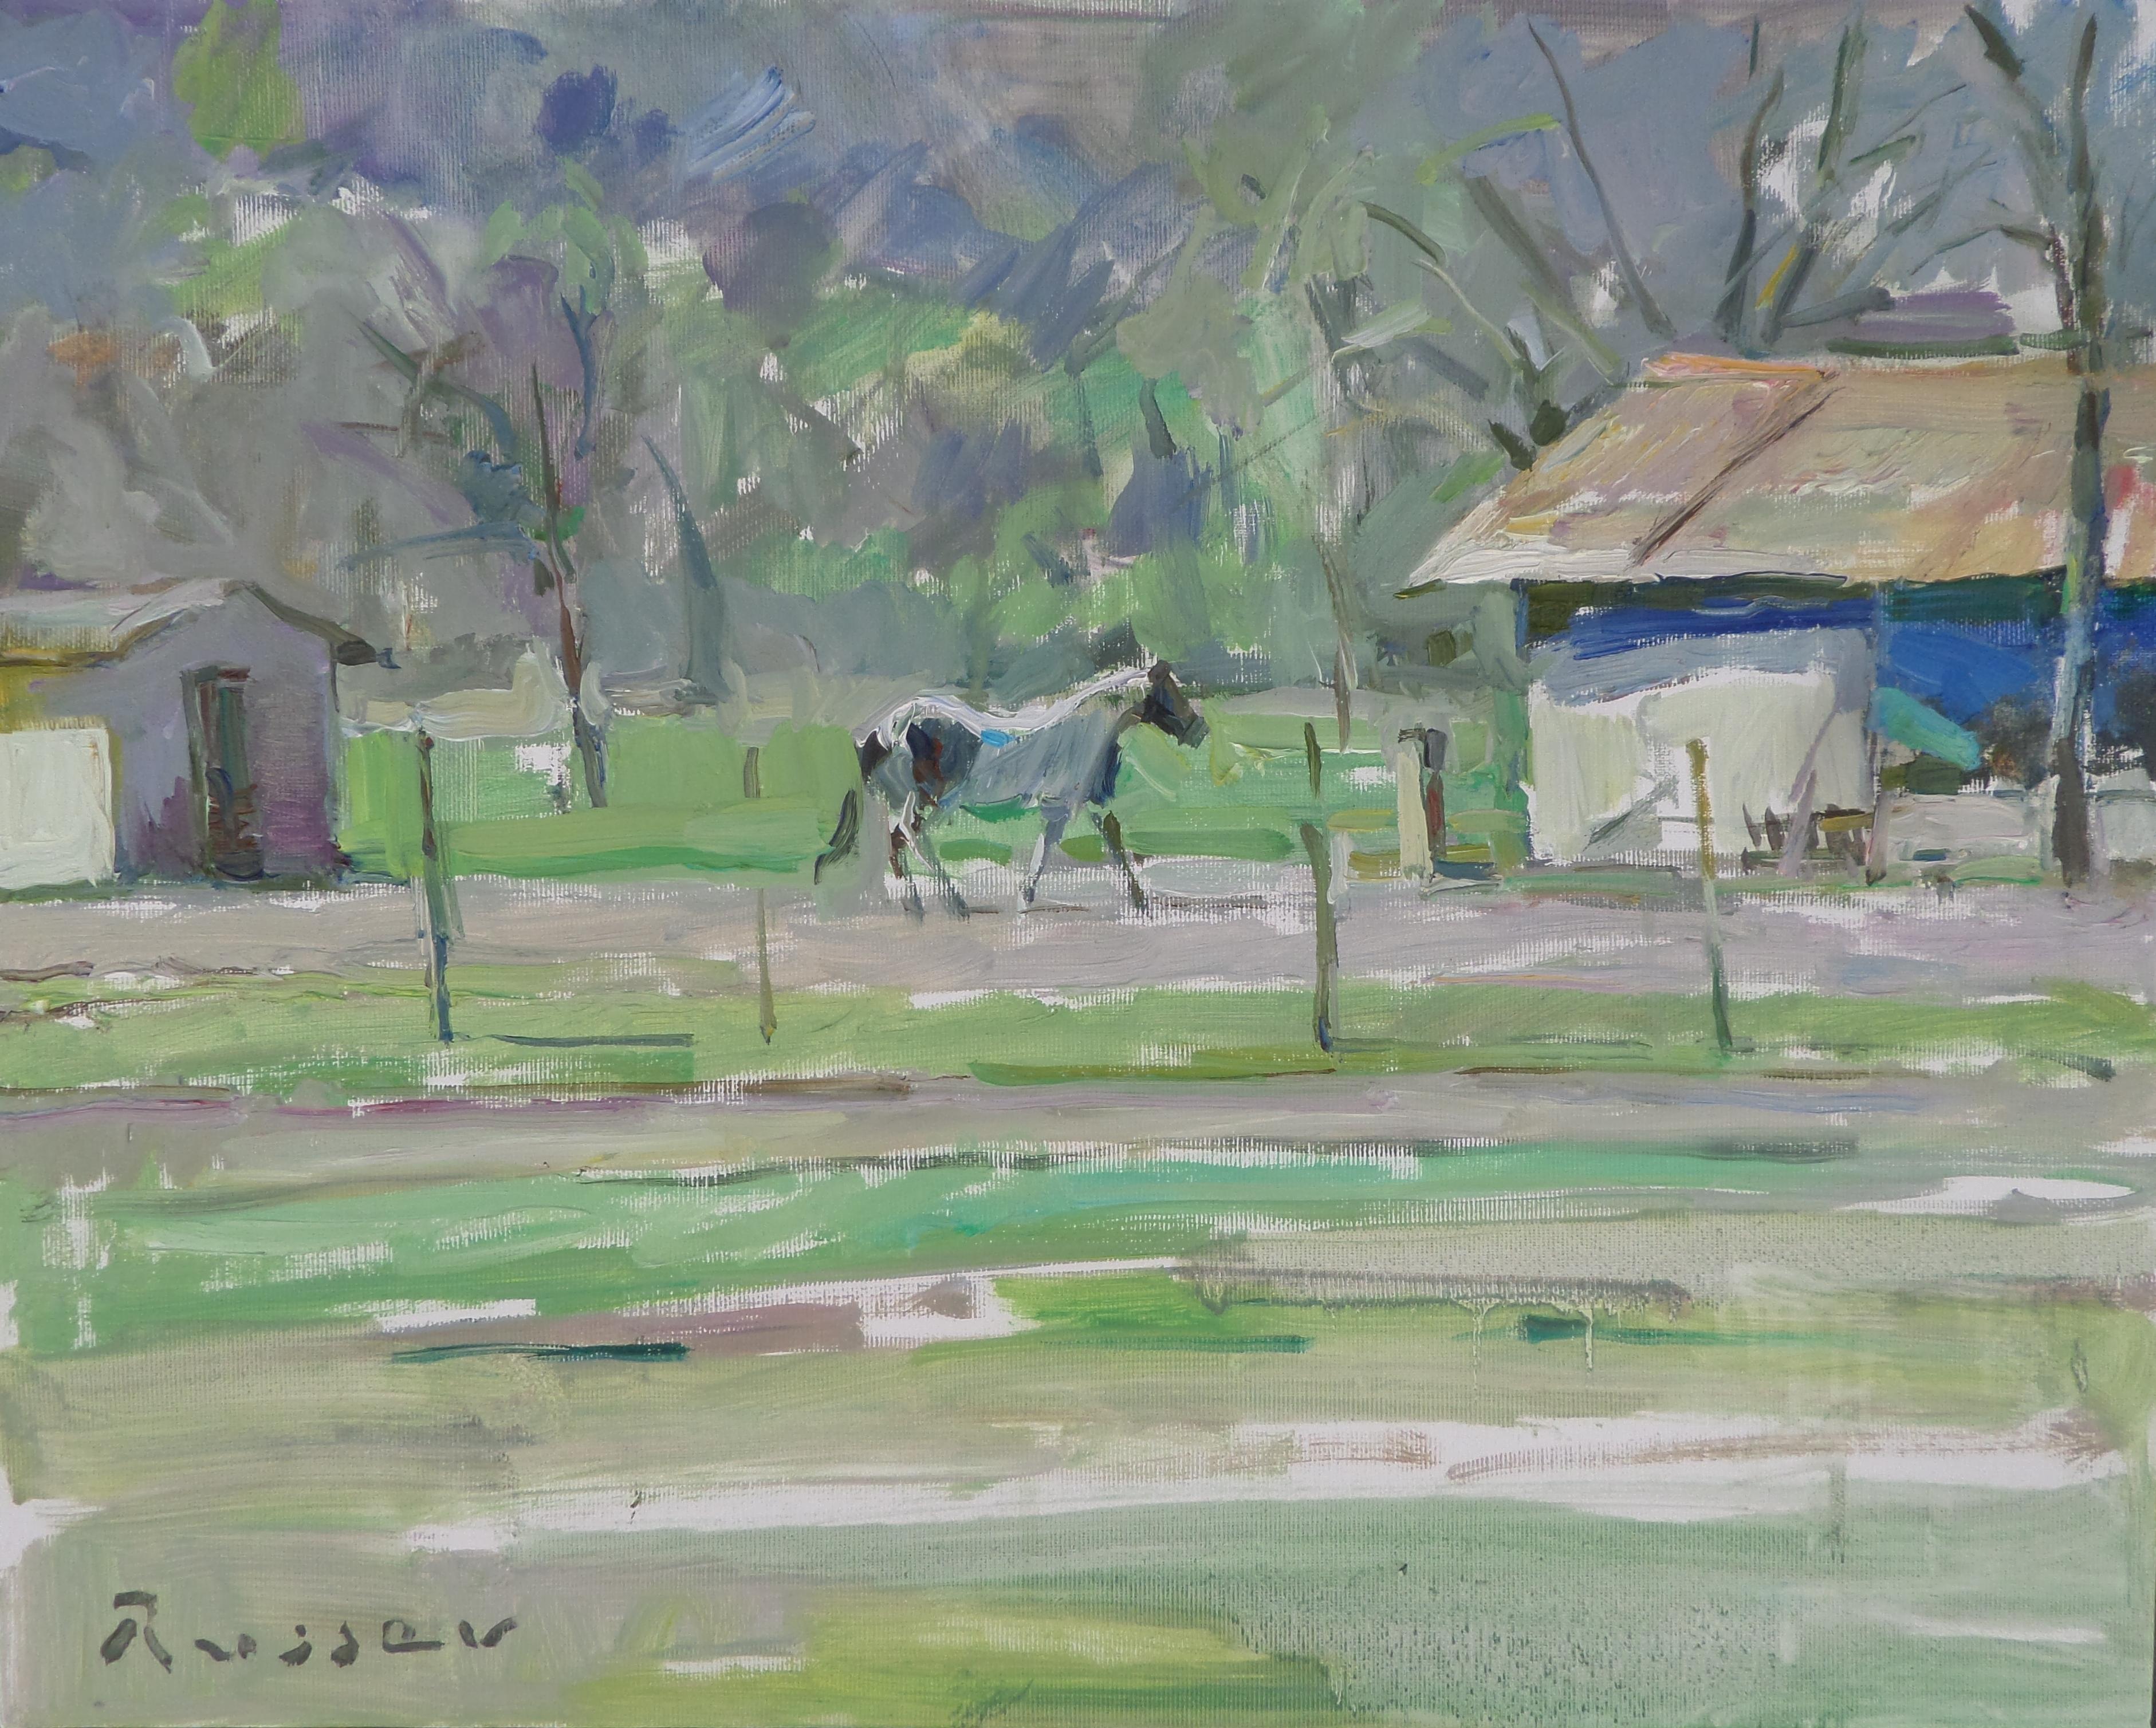 Ivan Roussev Landscape Painting - In The Farm - Landscape Oil Painting Colors Green Grey White Brown Blue